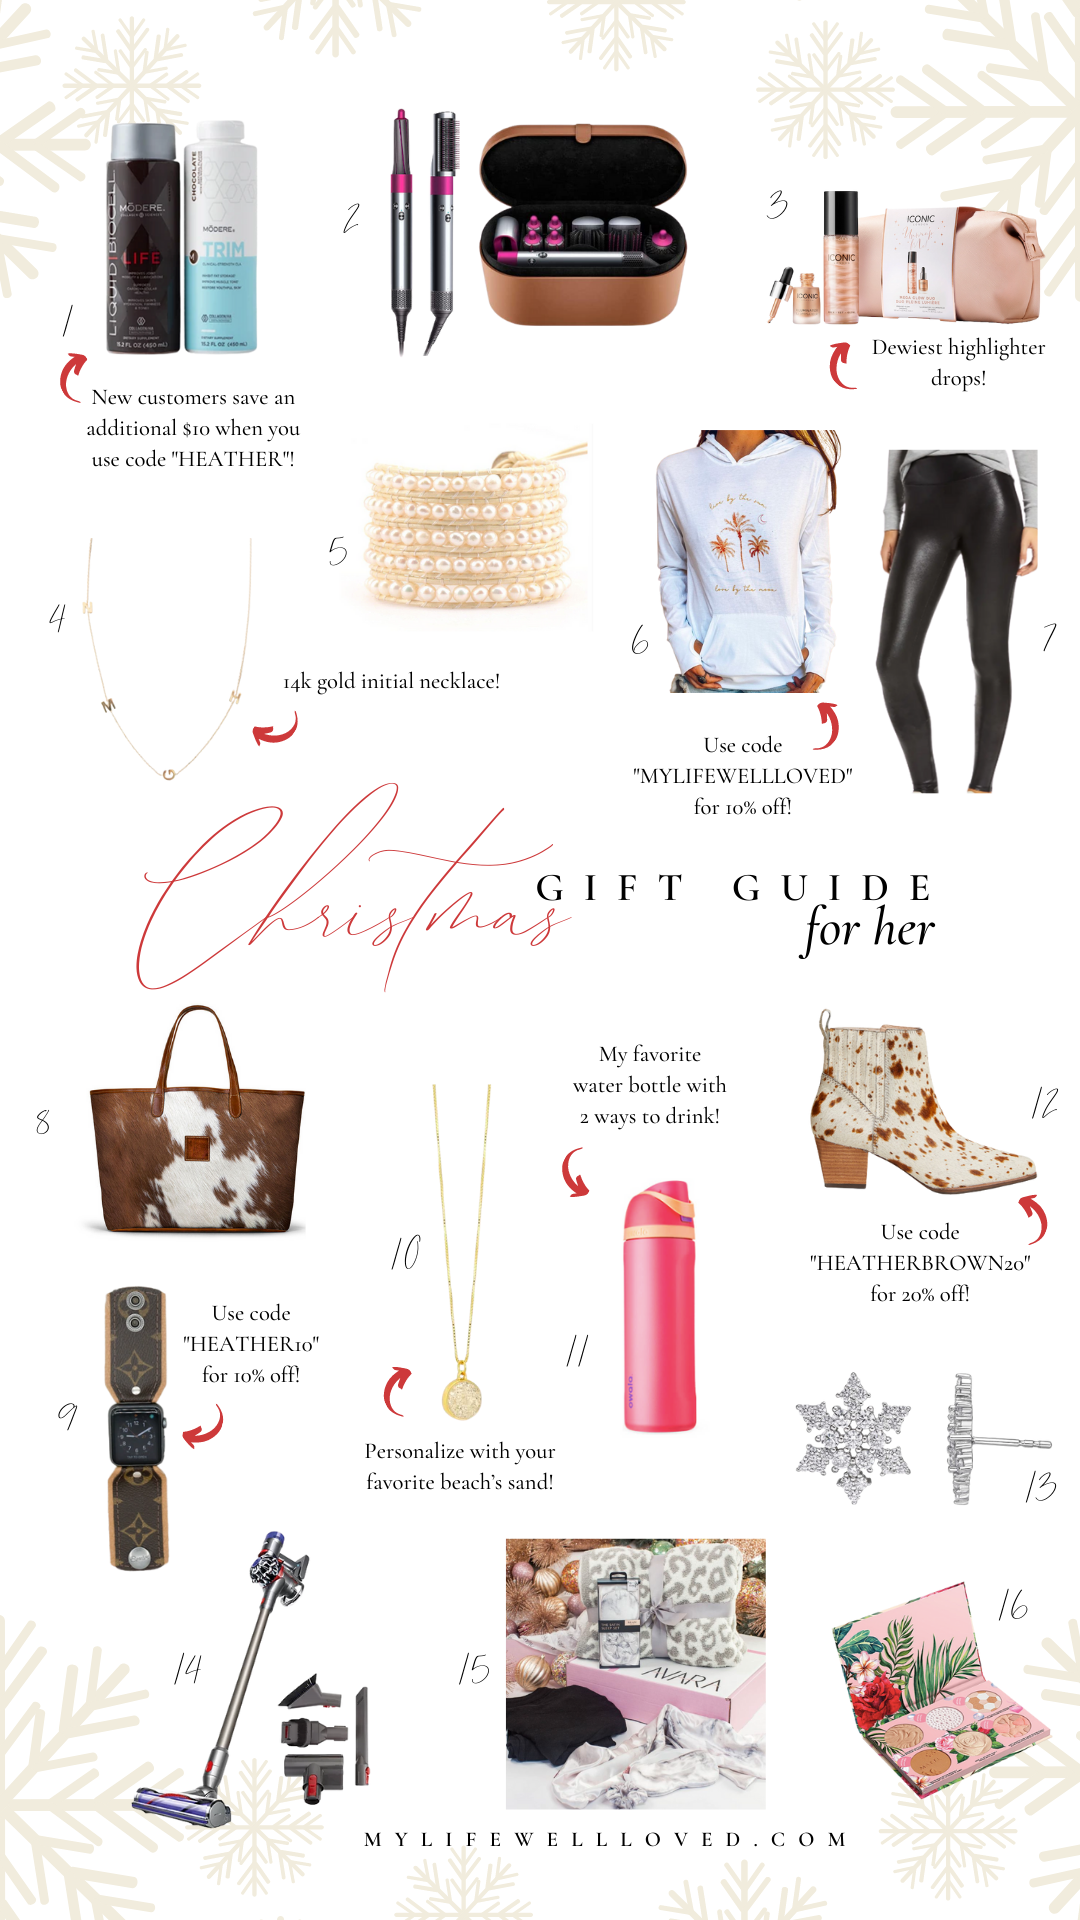 The Best Christmas Gift Ideas For New Moms - Healthy By Heather Brown